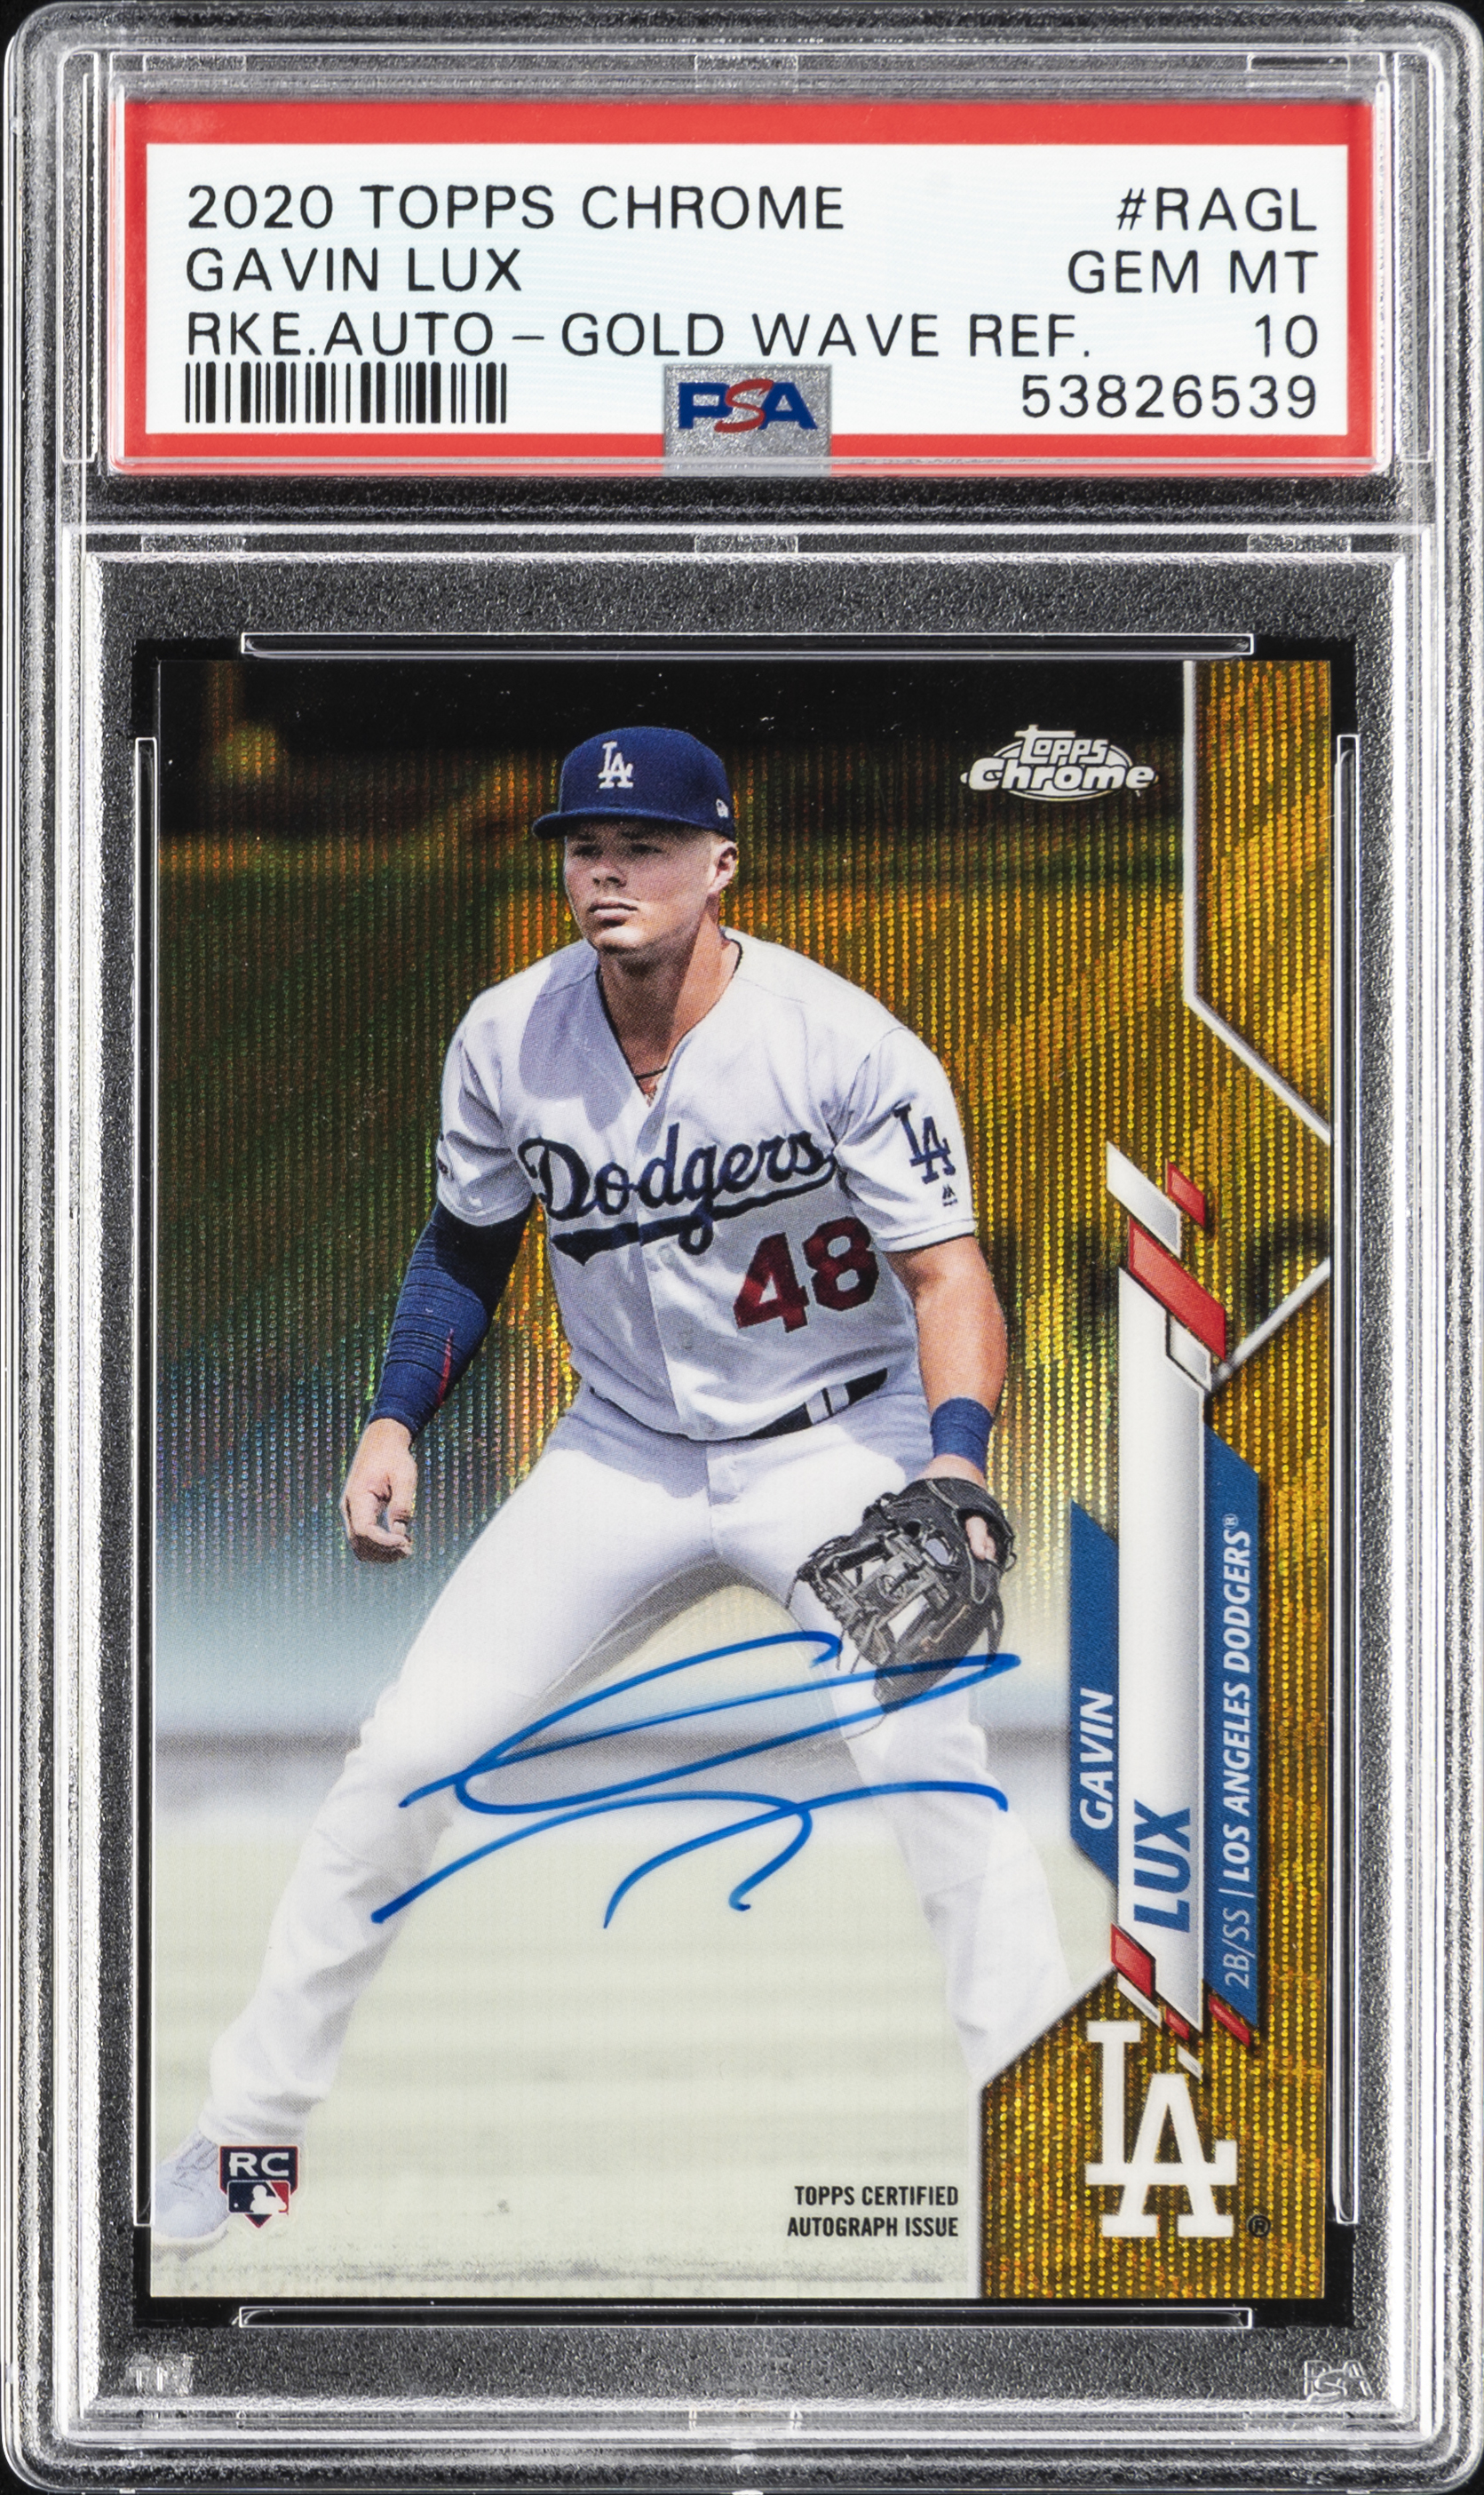 2020 Topps Chrome Rookie Autographs Gold Wave Refractor #RA-GL Gavin Lux Signed Rookie Card (#48/50) – PSA GEM MT 10